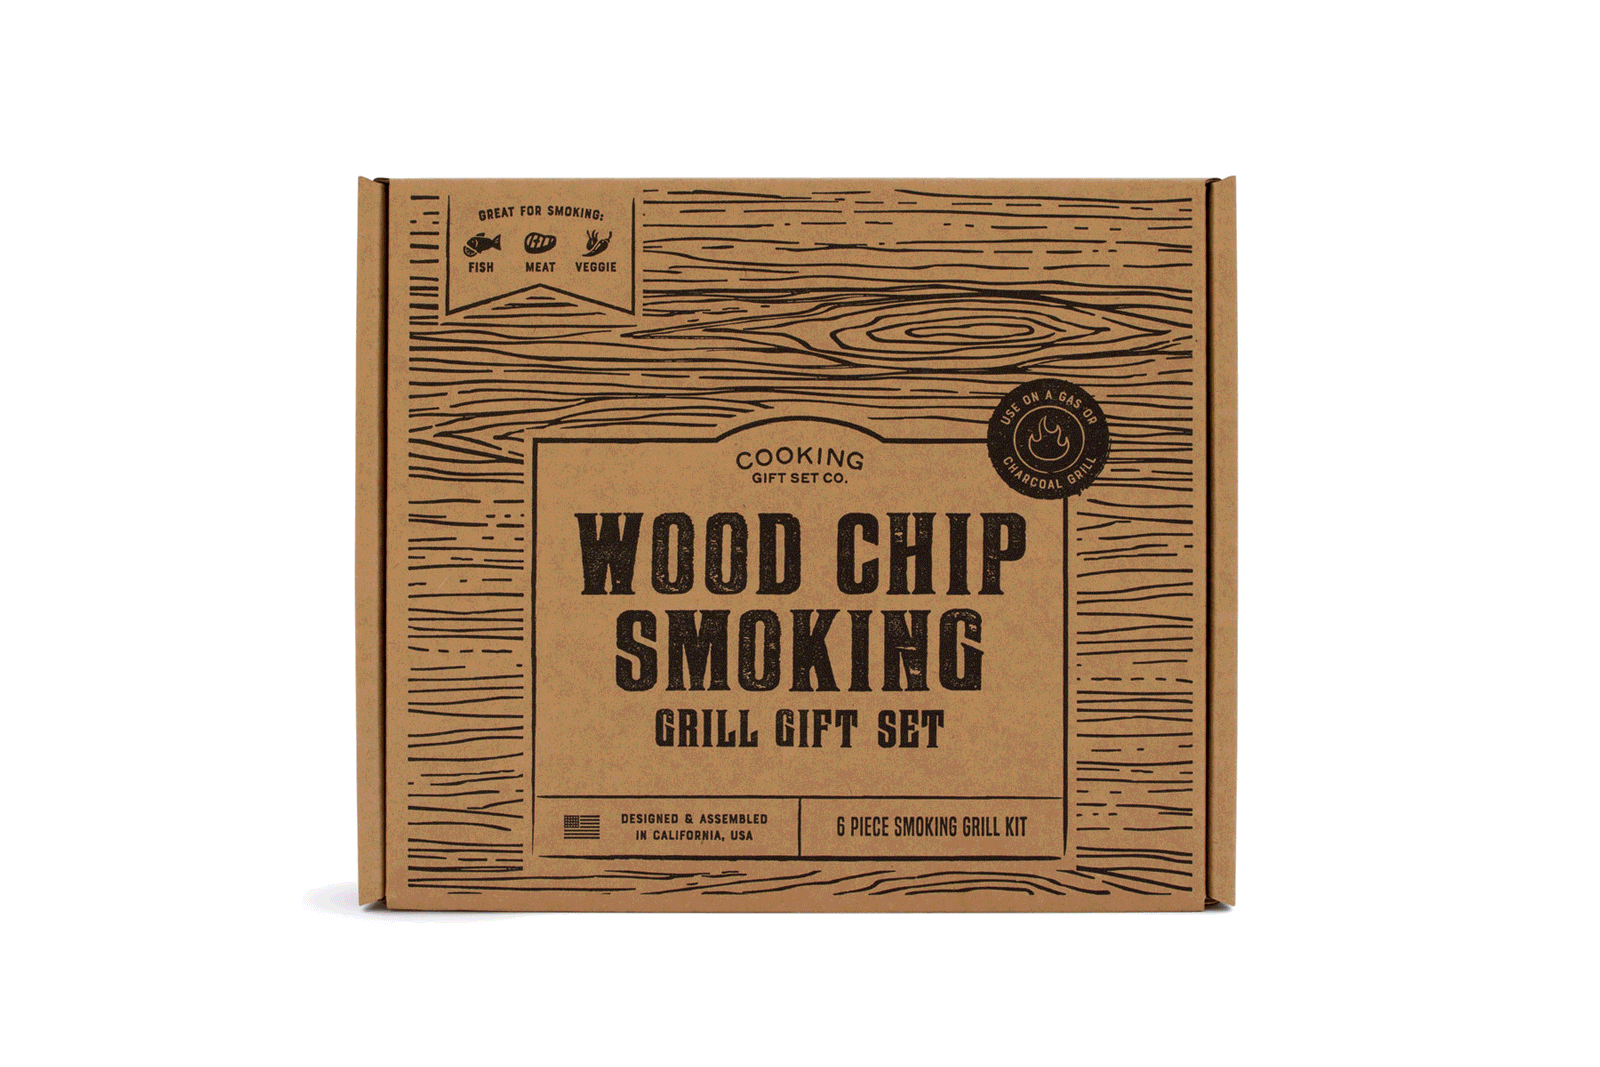 Small Business Amazon Product Photography for Cooking Giftset Co.'s Wood Chip Smoking Kit, Demonstrating a flexible, interchangable background - Design & Photography by Fuze Branding